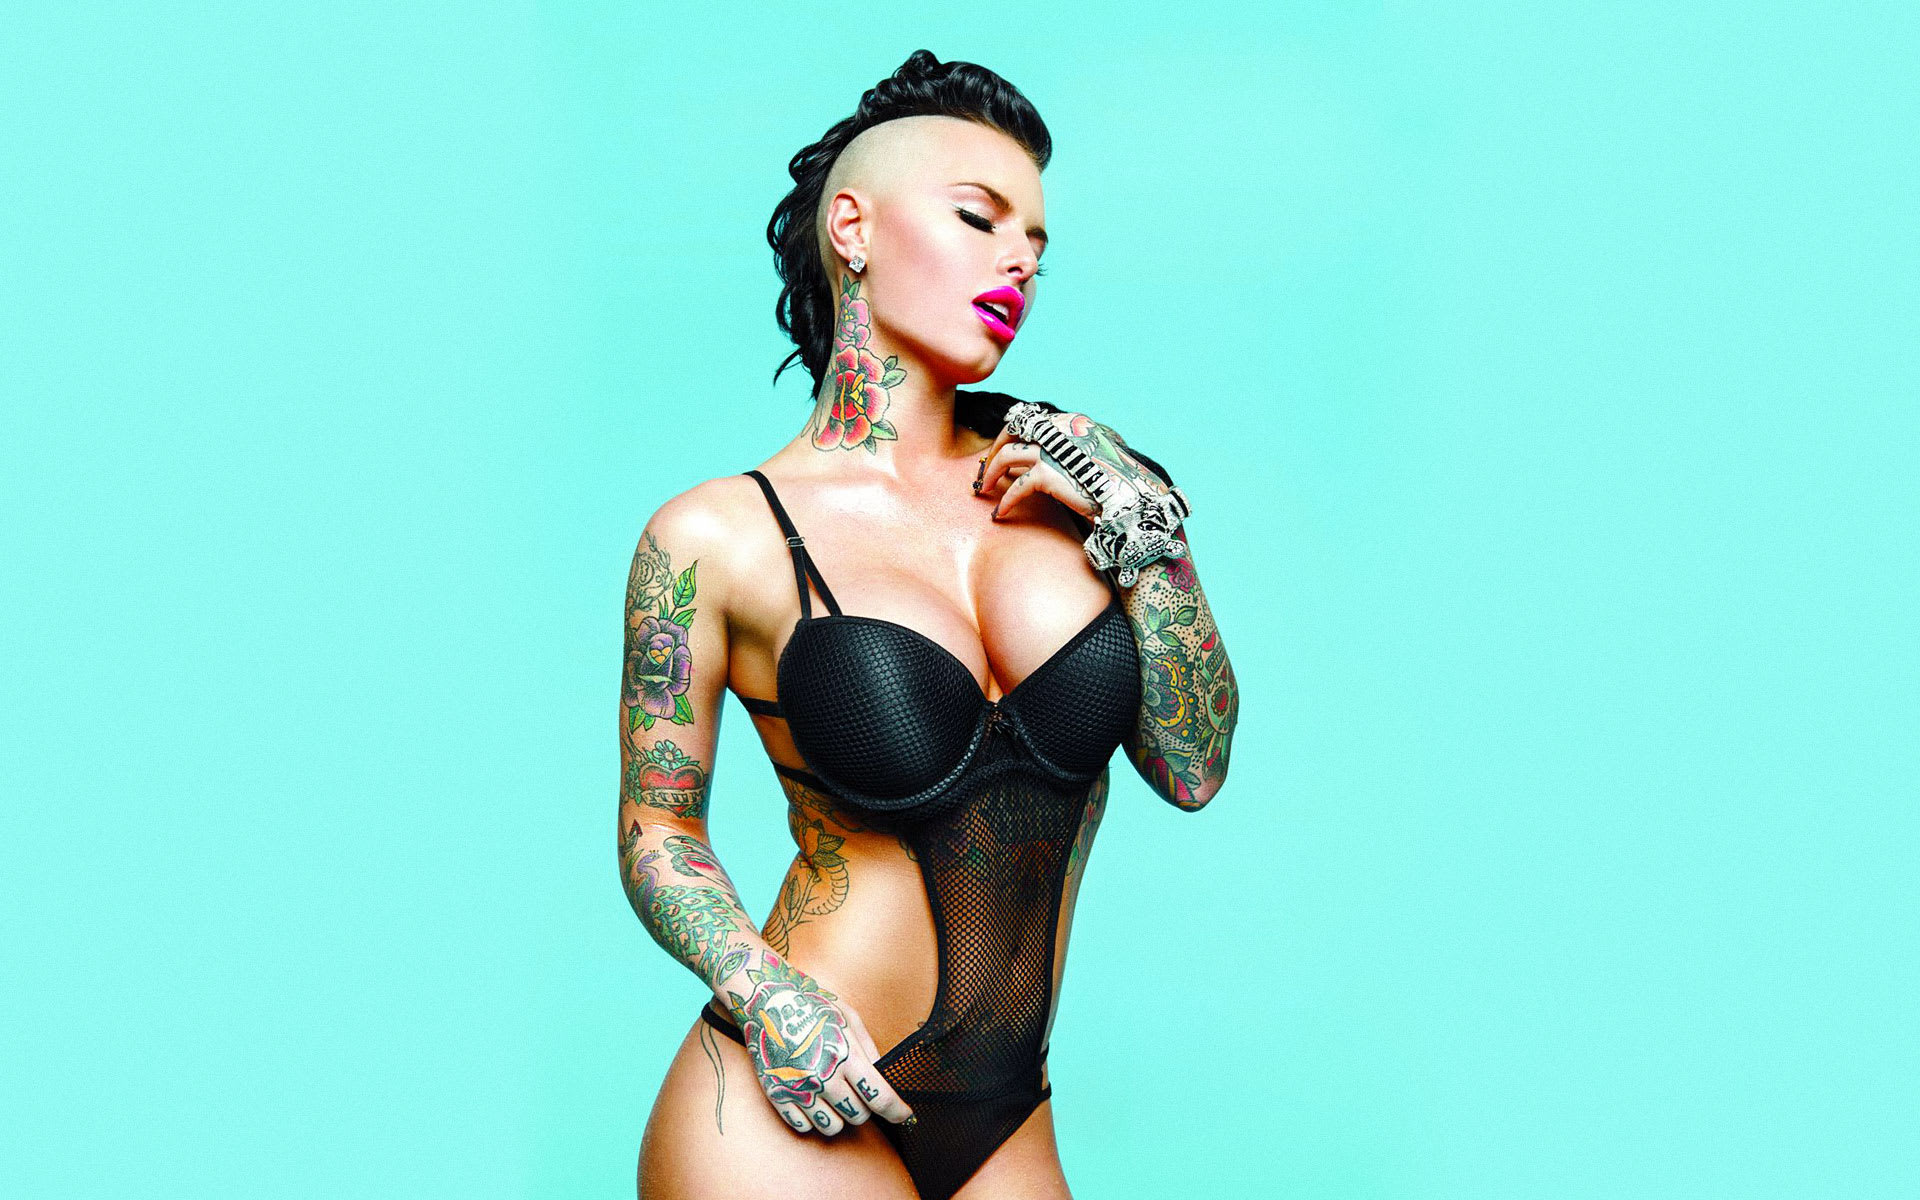 Sexiest Porn Stars with Tattoos | Filthy